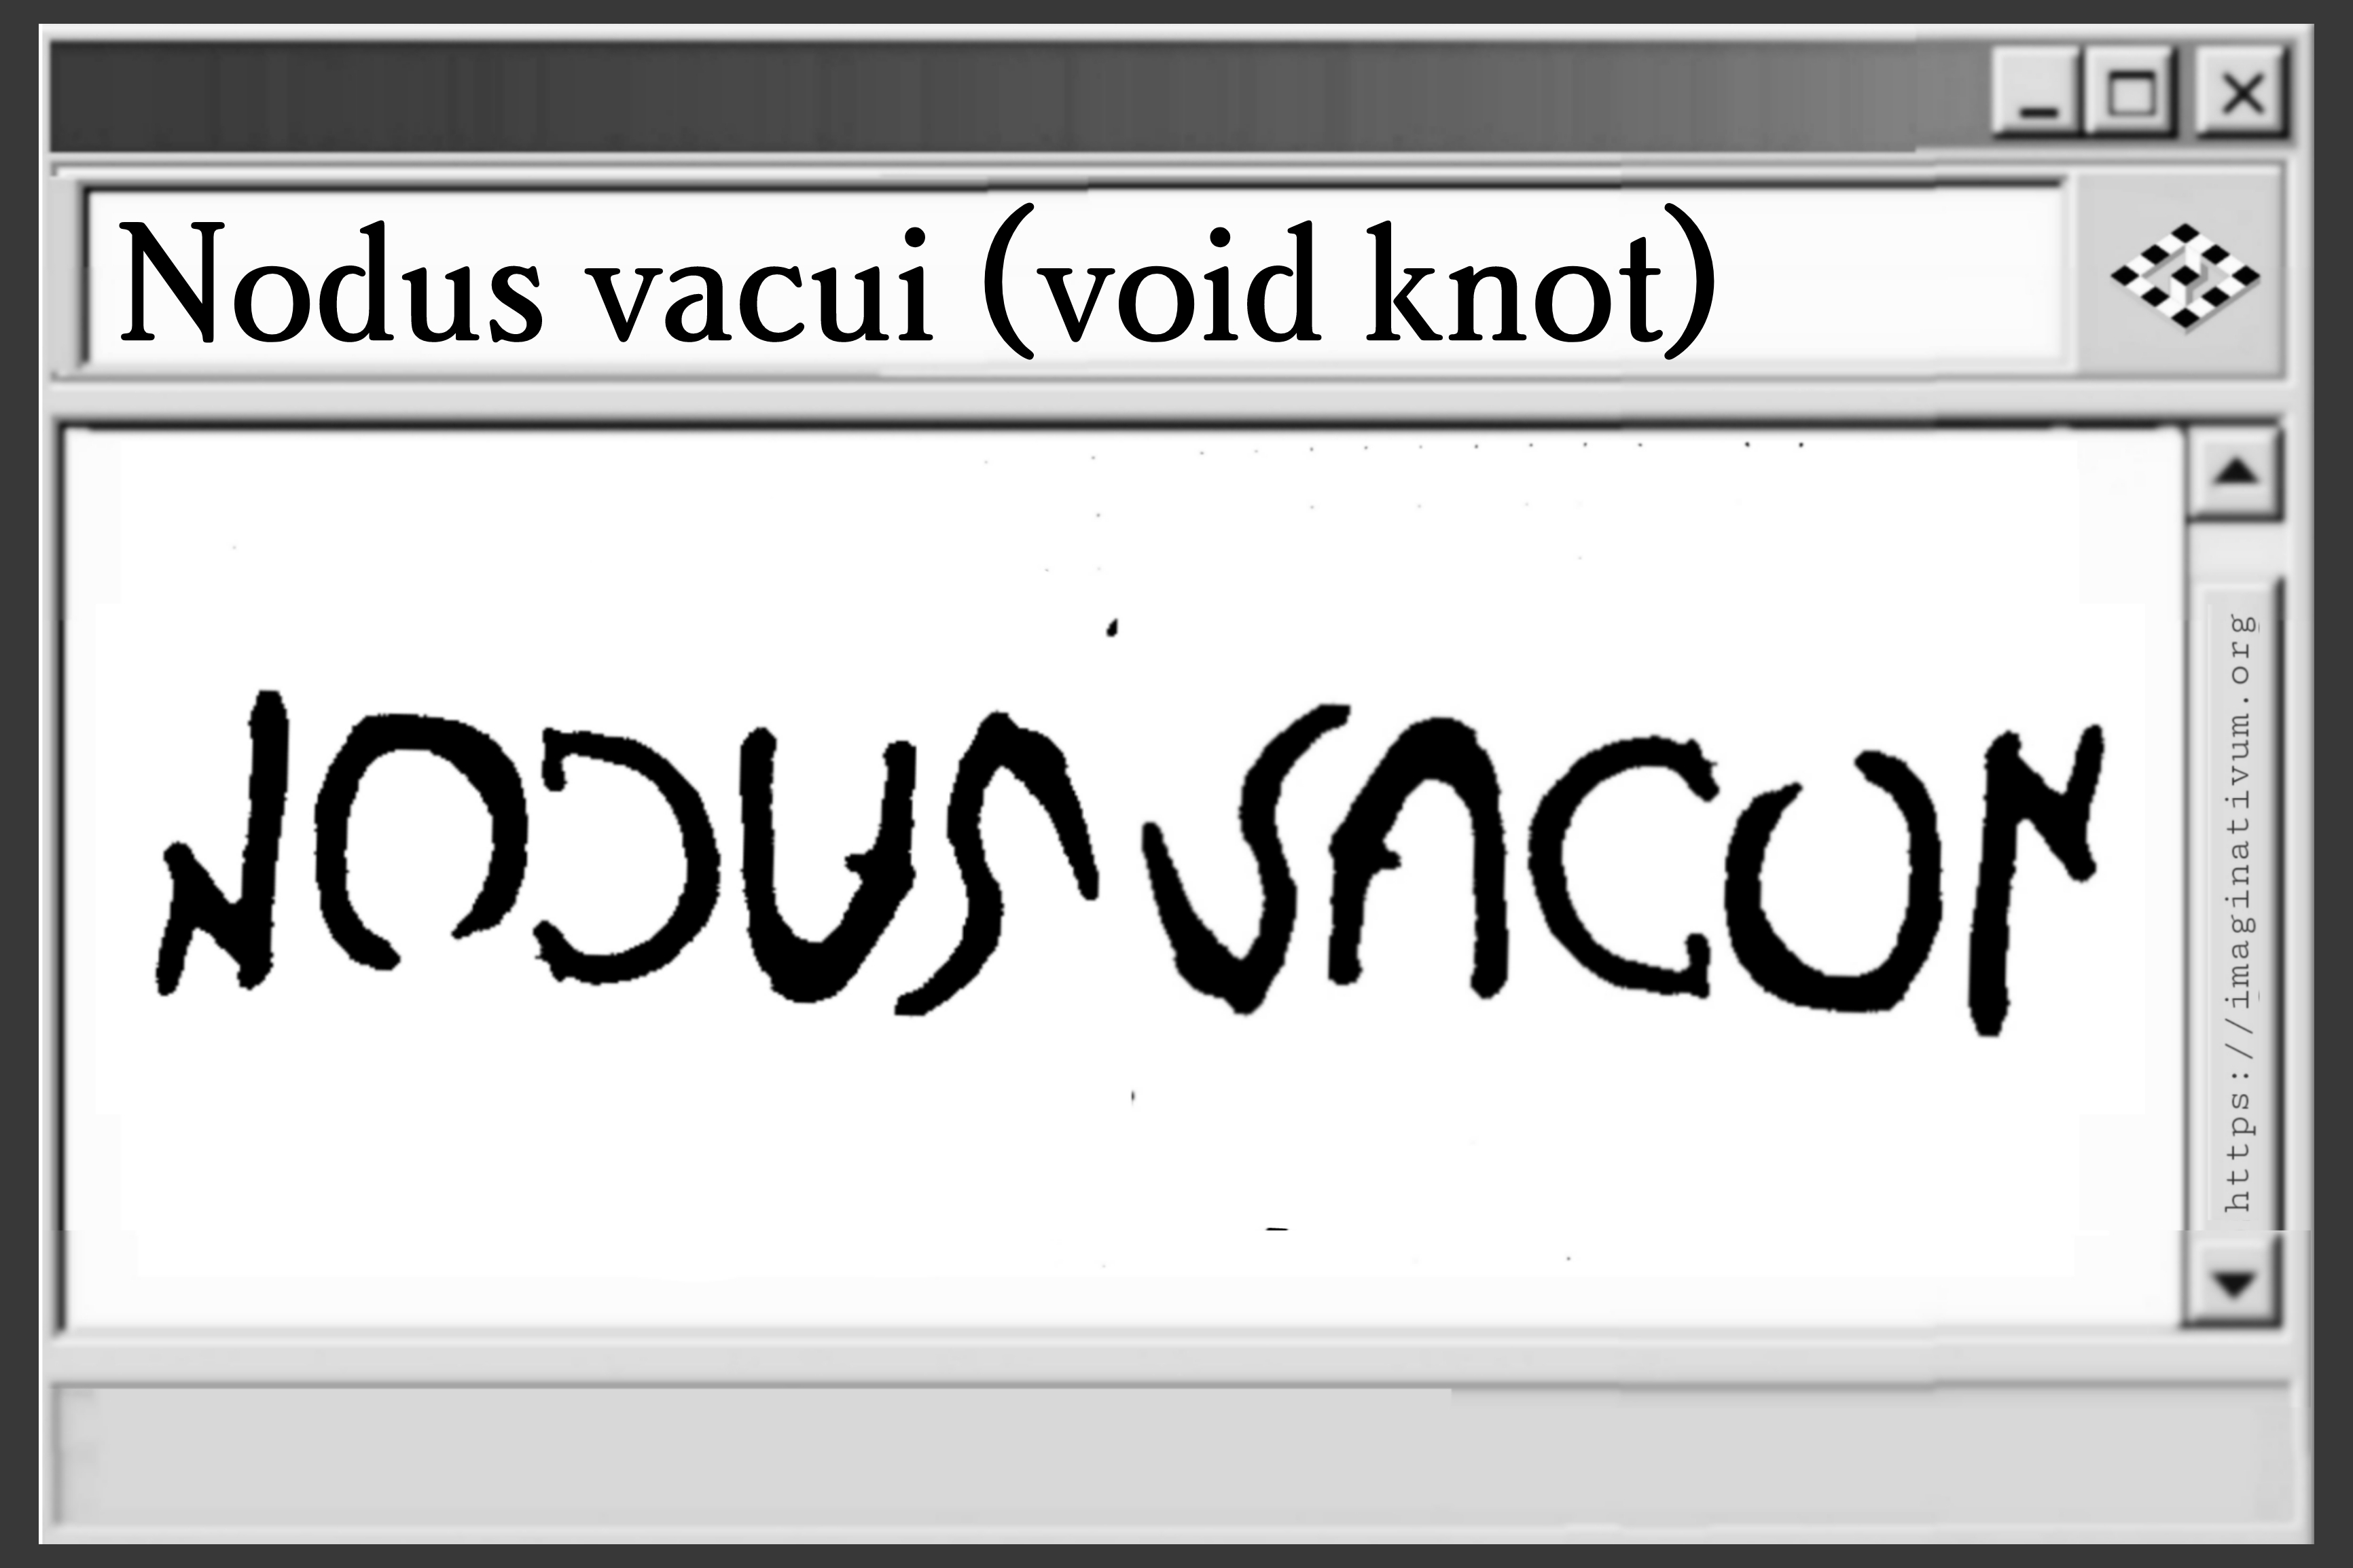 <b>Ambigram Nodus Vacui</b><br/><br/>Nodus Vacui is latin and stands for "void knot". It encapsulates the idea of mathematical reality turning into physical reality by looping into itself multiple times and forming a knot.